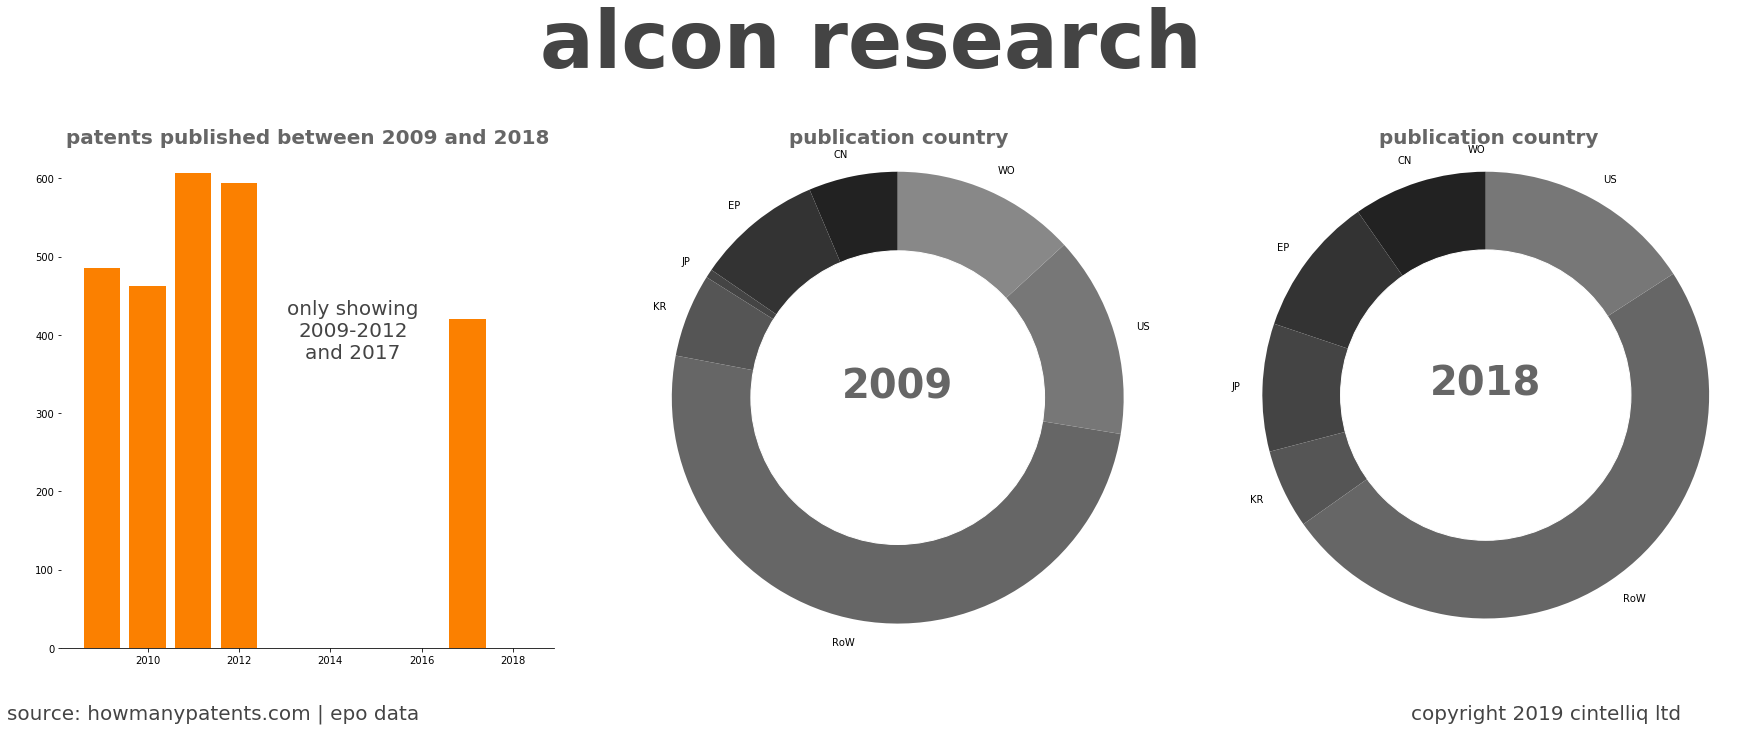 summary of patents for Alcon Research